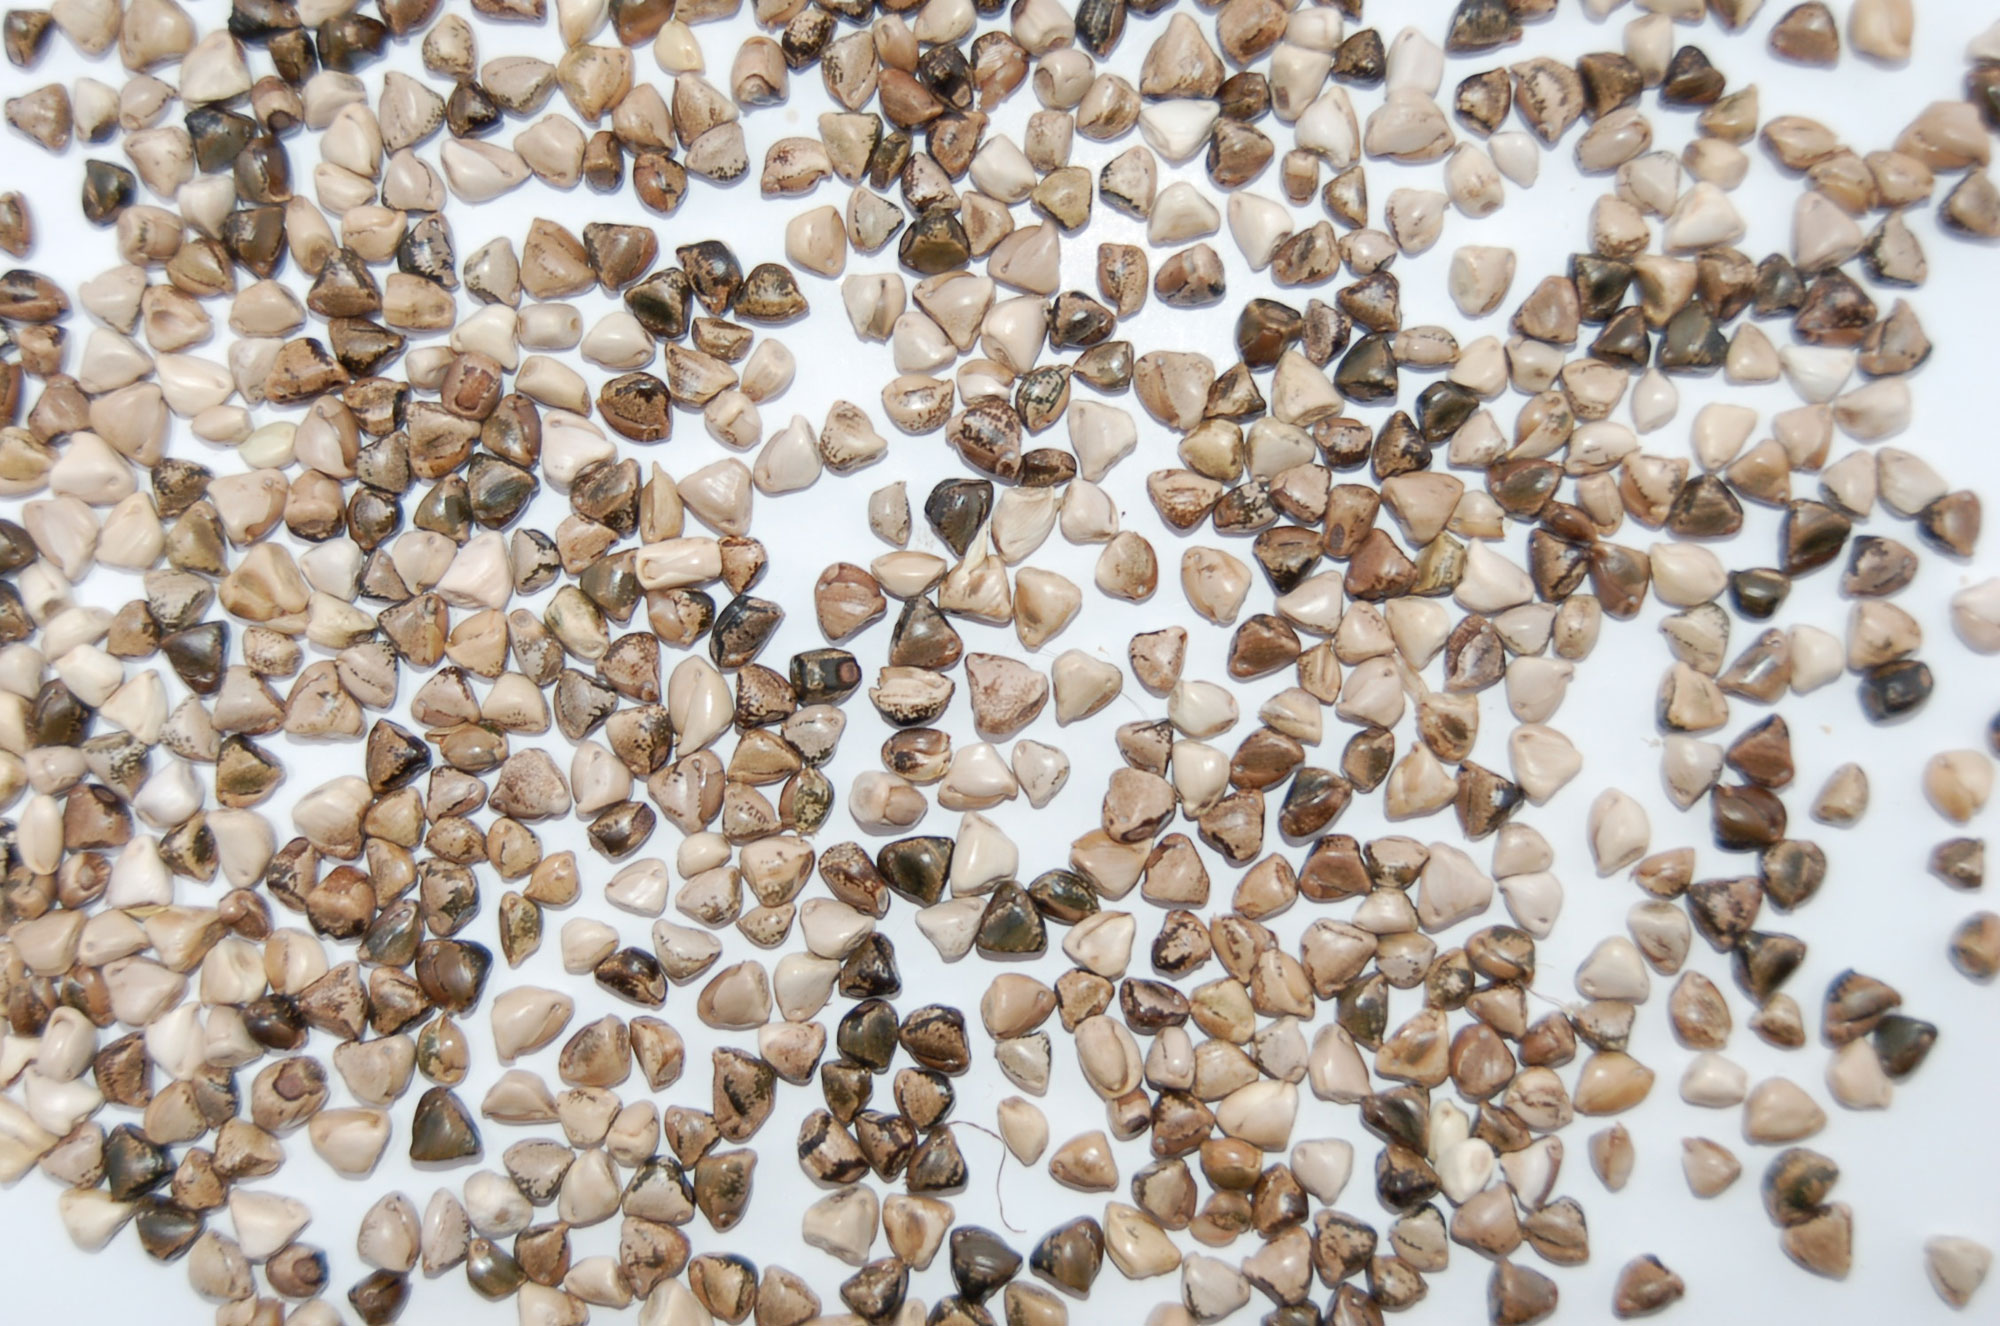 Photograph of teosinte kernels scattered on a white background. The photo shows numerous roughly triangular kernels that vary in color from off white to deep brown.